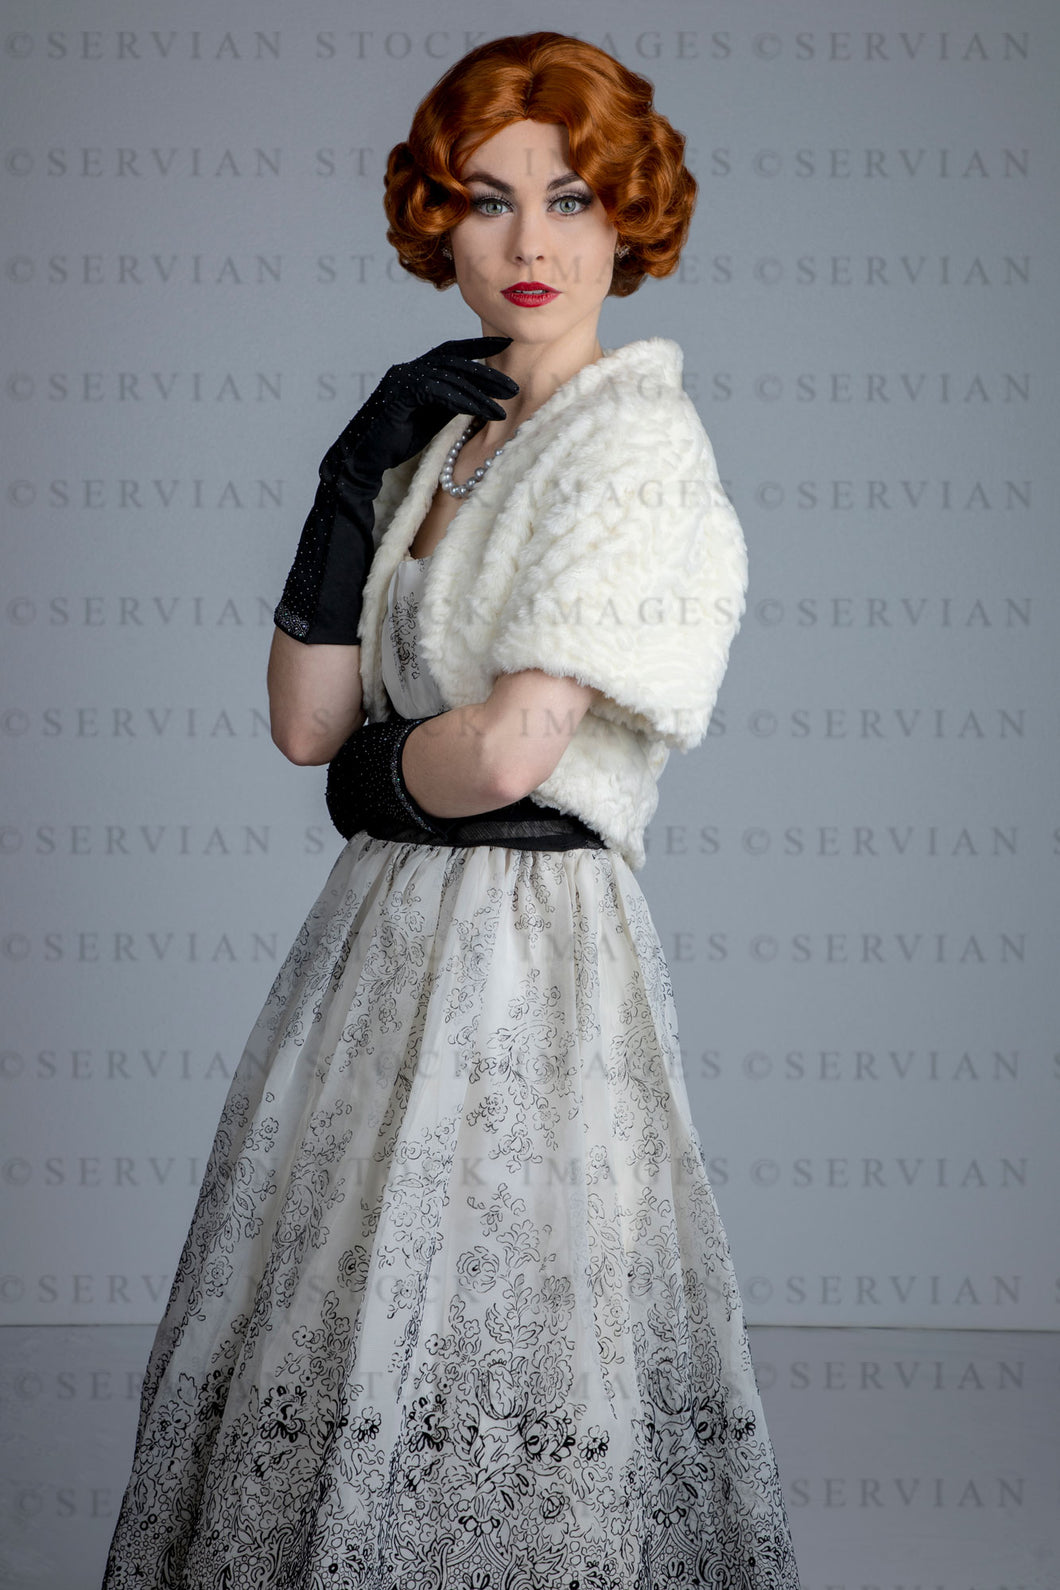 1950s woman in vintage dress, white fur shrug, and black gloves (Lacey 2524)